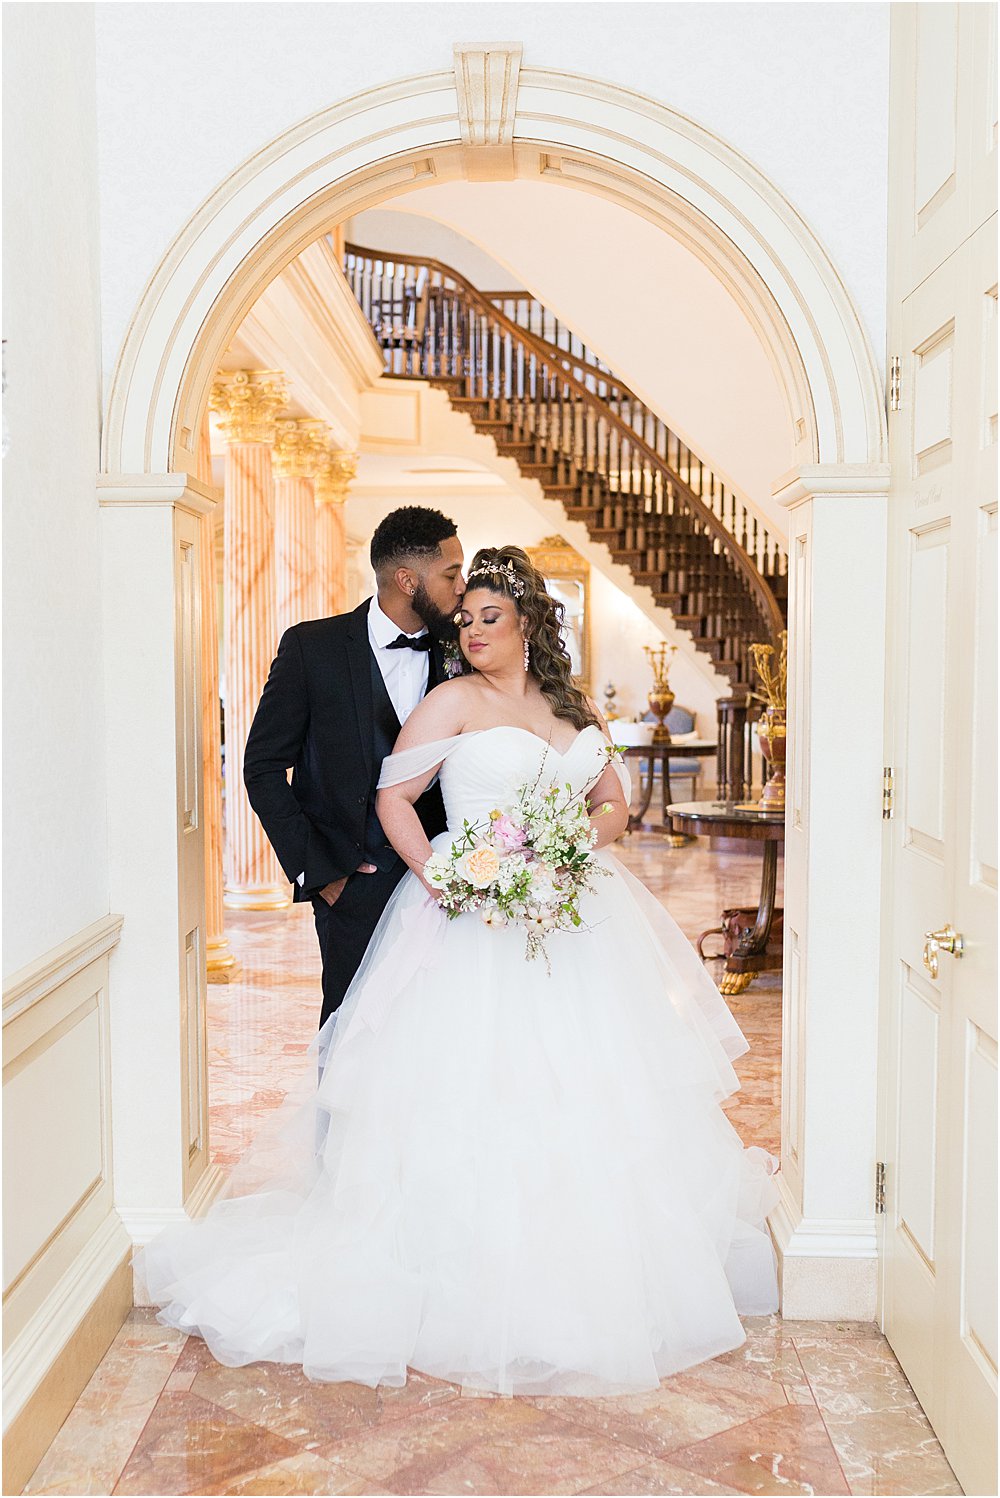 Bride and groom pose for photo together under a arched doorway at The Estate at River Run during whimsical spring wedding editorial